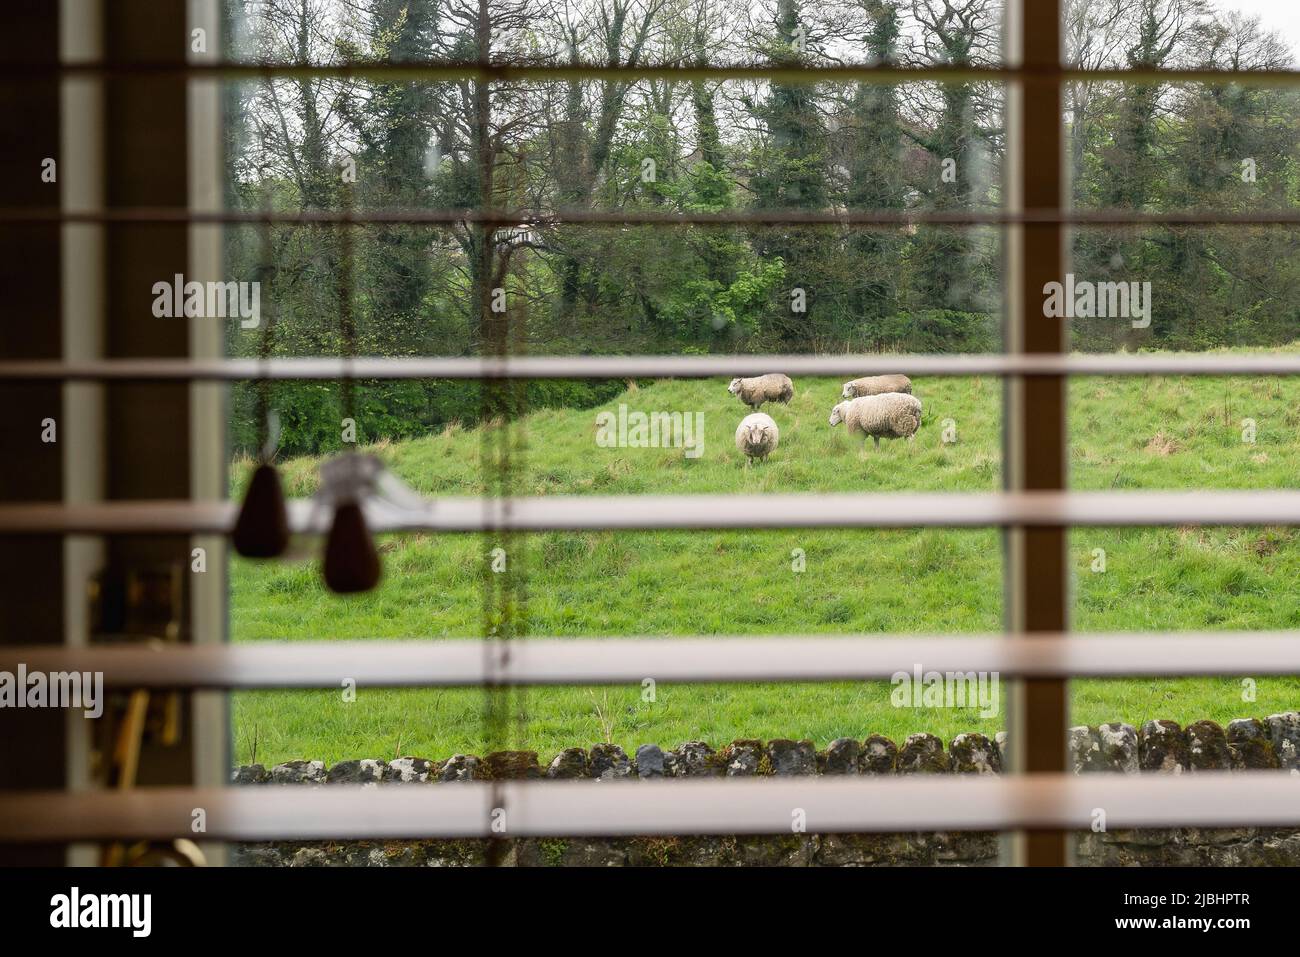 Sheep seen on grass through a wet window with blurred wet points. The window has defocused horizontal slat blinds and cords with handles Stock Photo